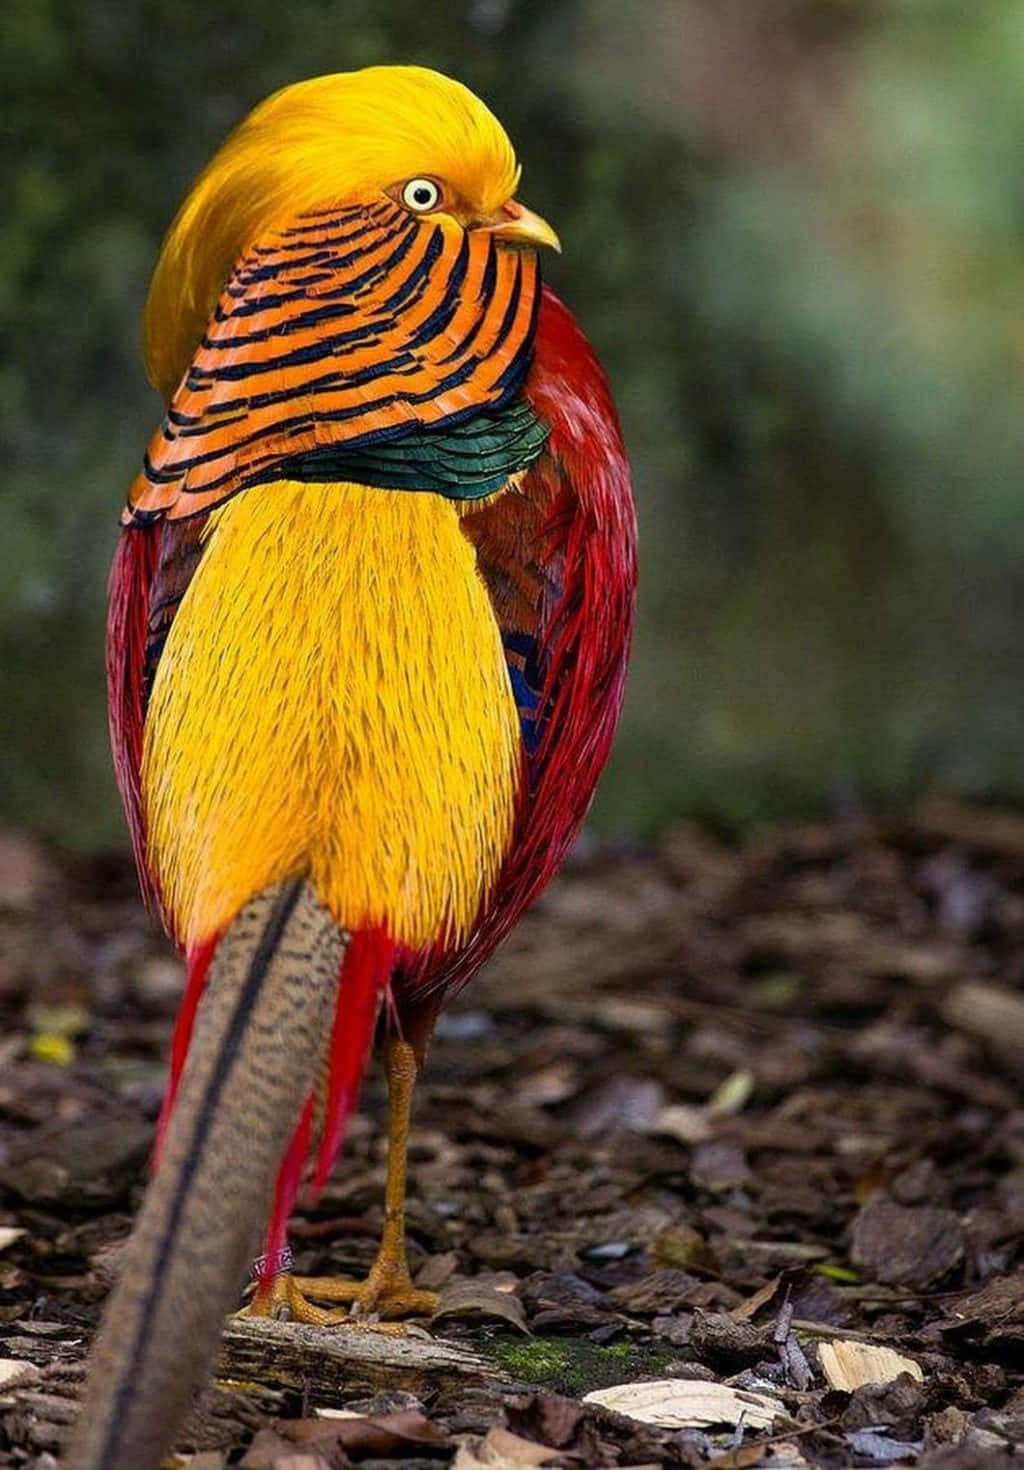 “Beautiful Birds of Colorful Feathers.”